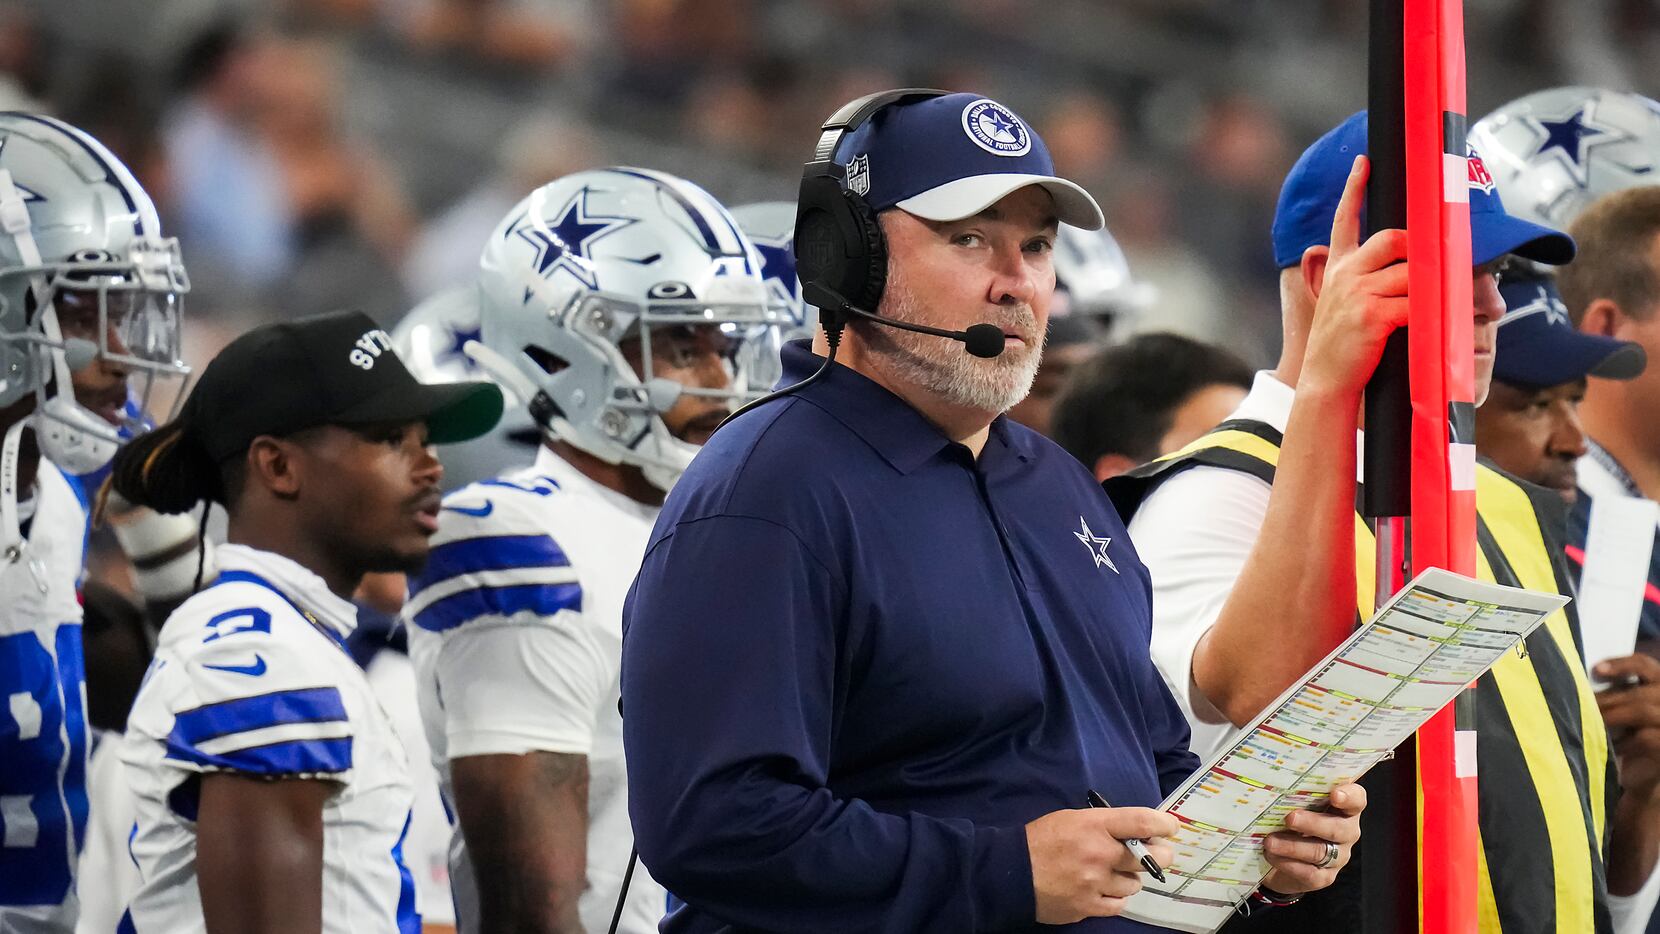 Cowboys coach Mike McCarthy grades himself on play-calling, says